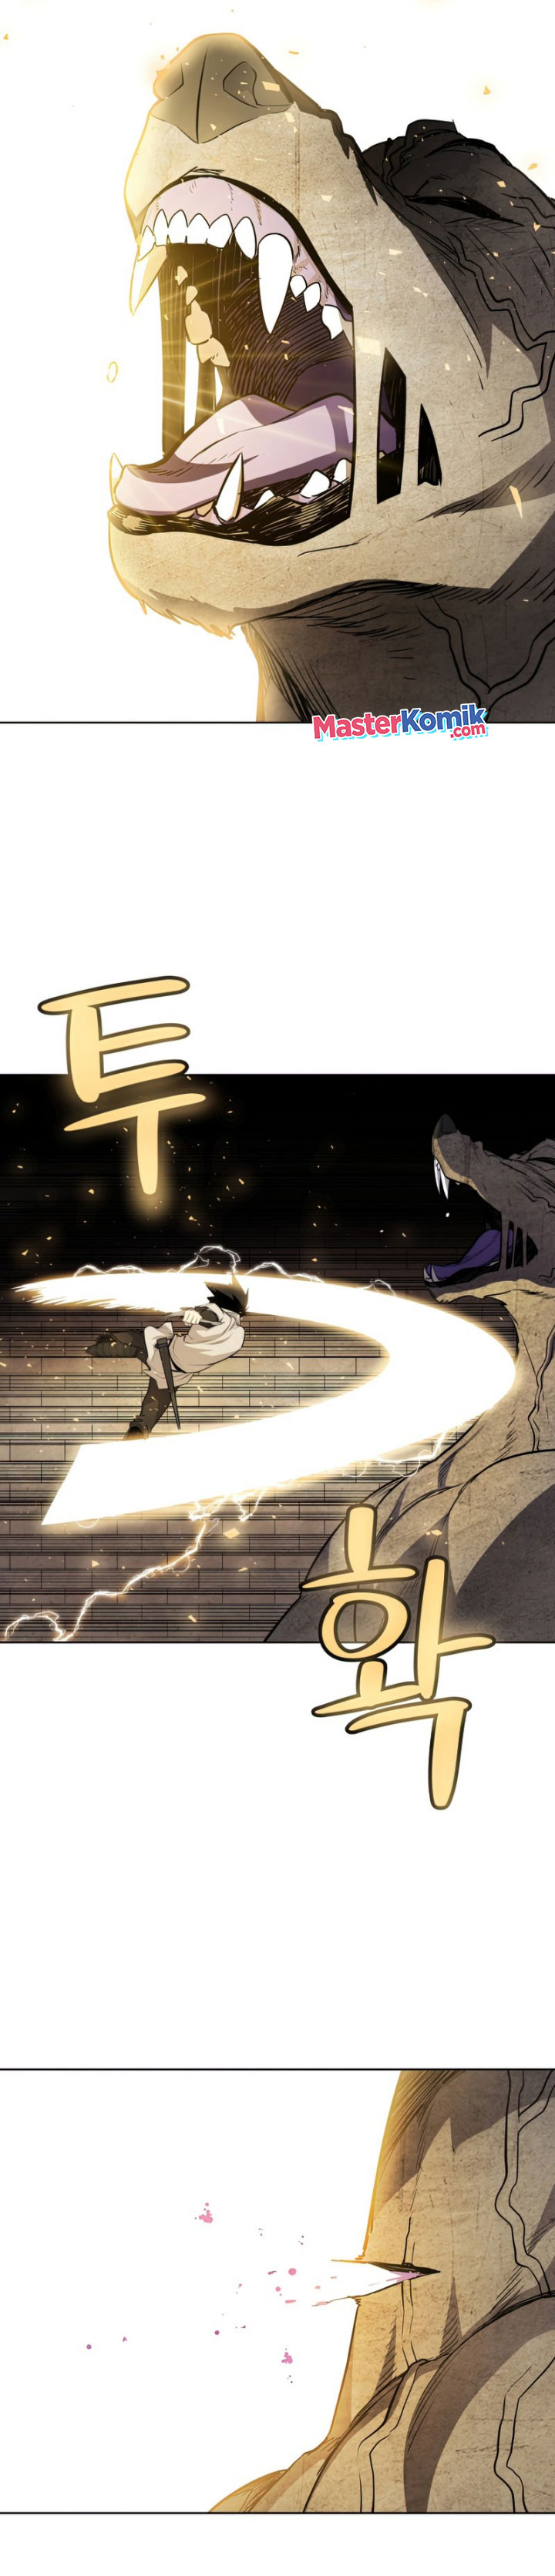 Overpowered Sword Chapter 35